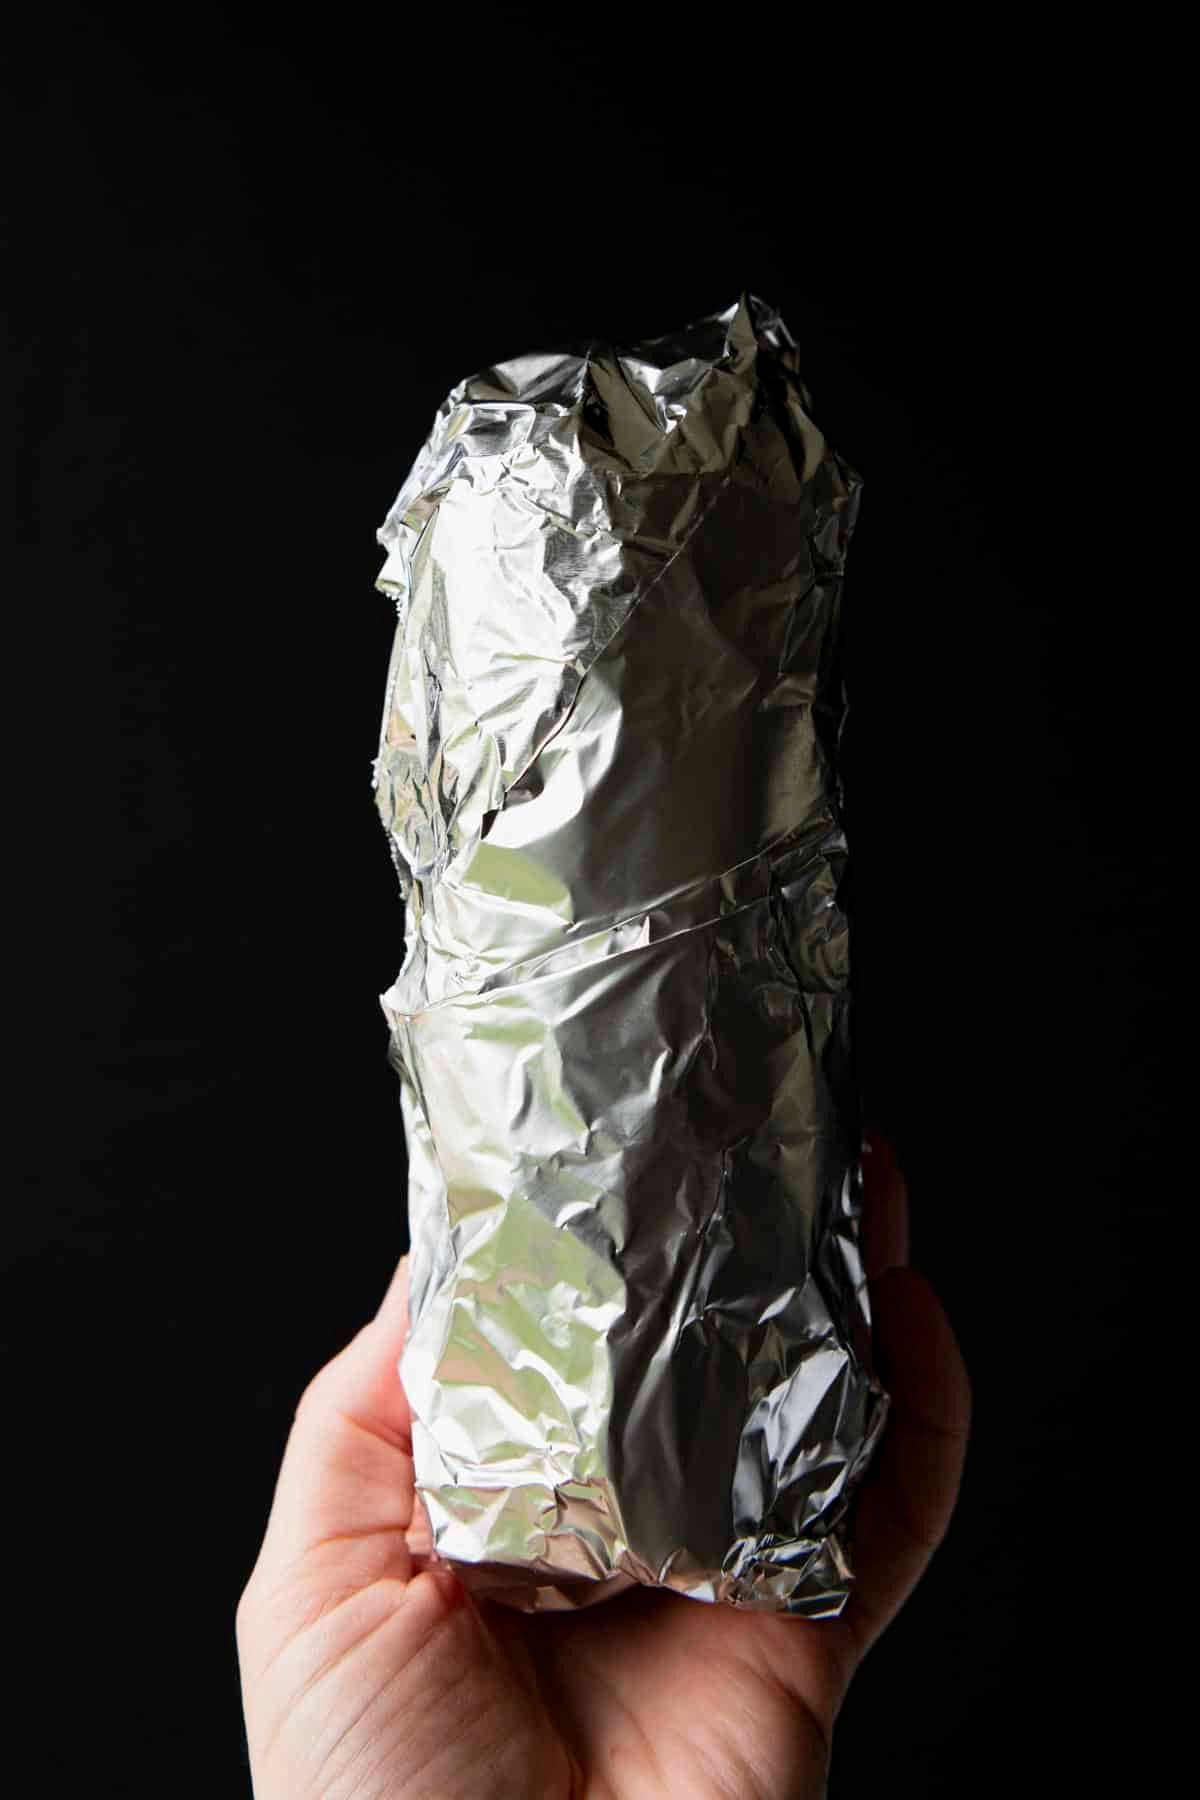 Chicken burrito wrapped in foil for the freezer.